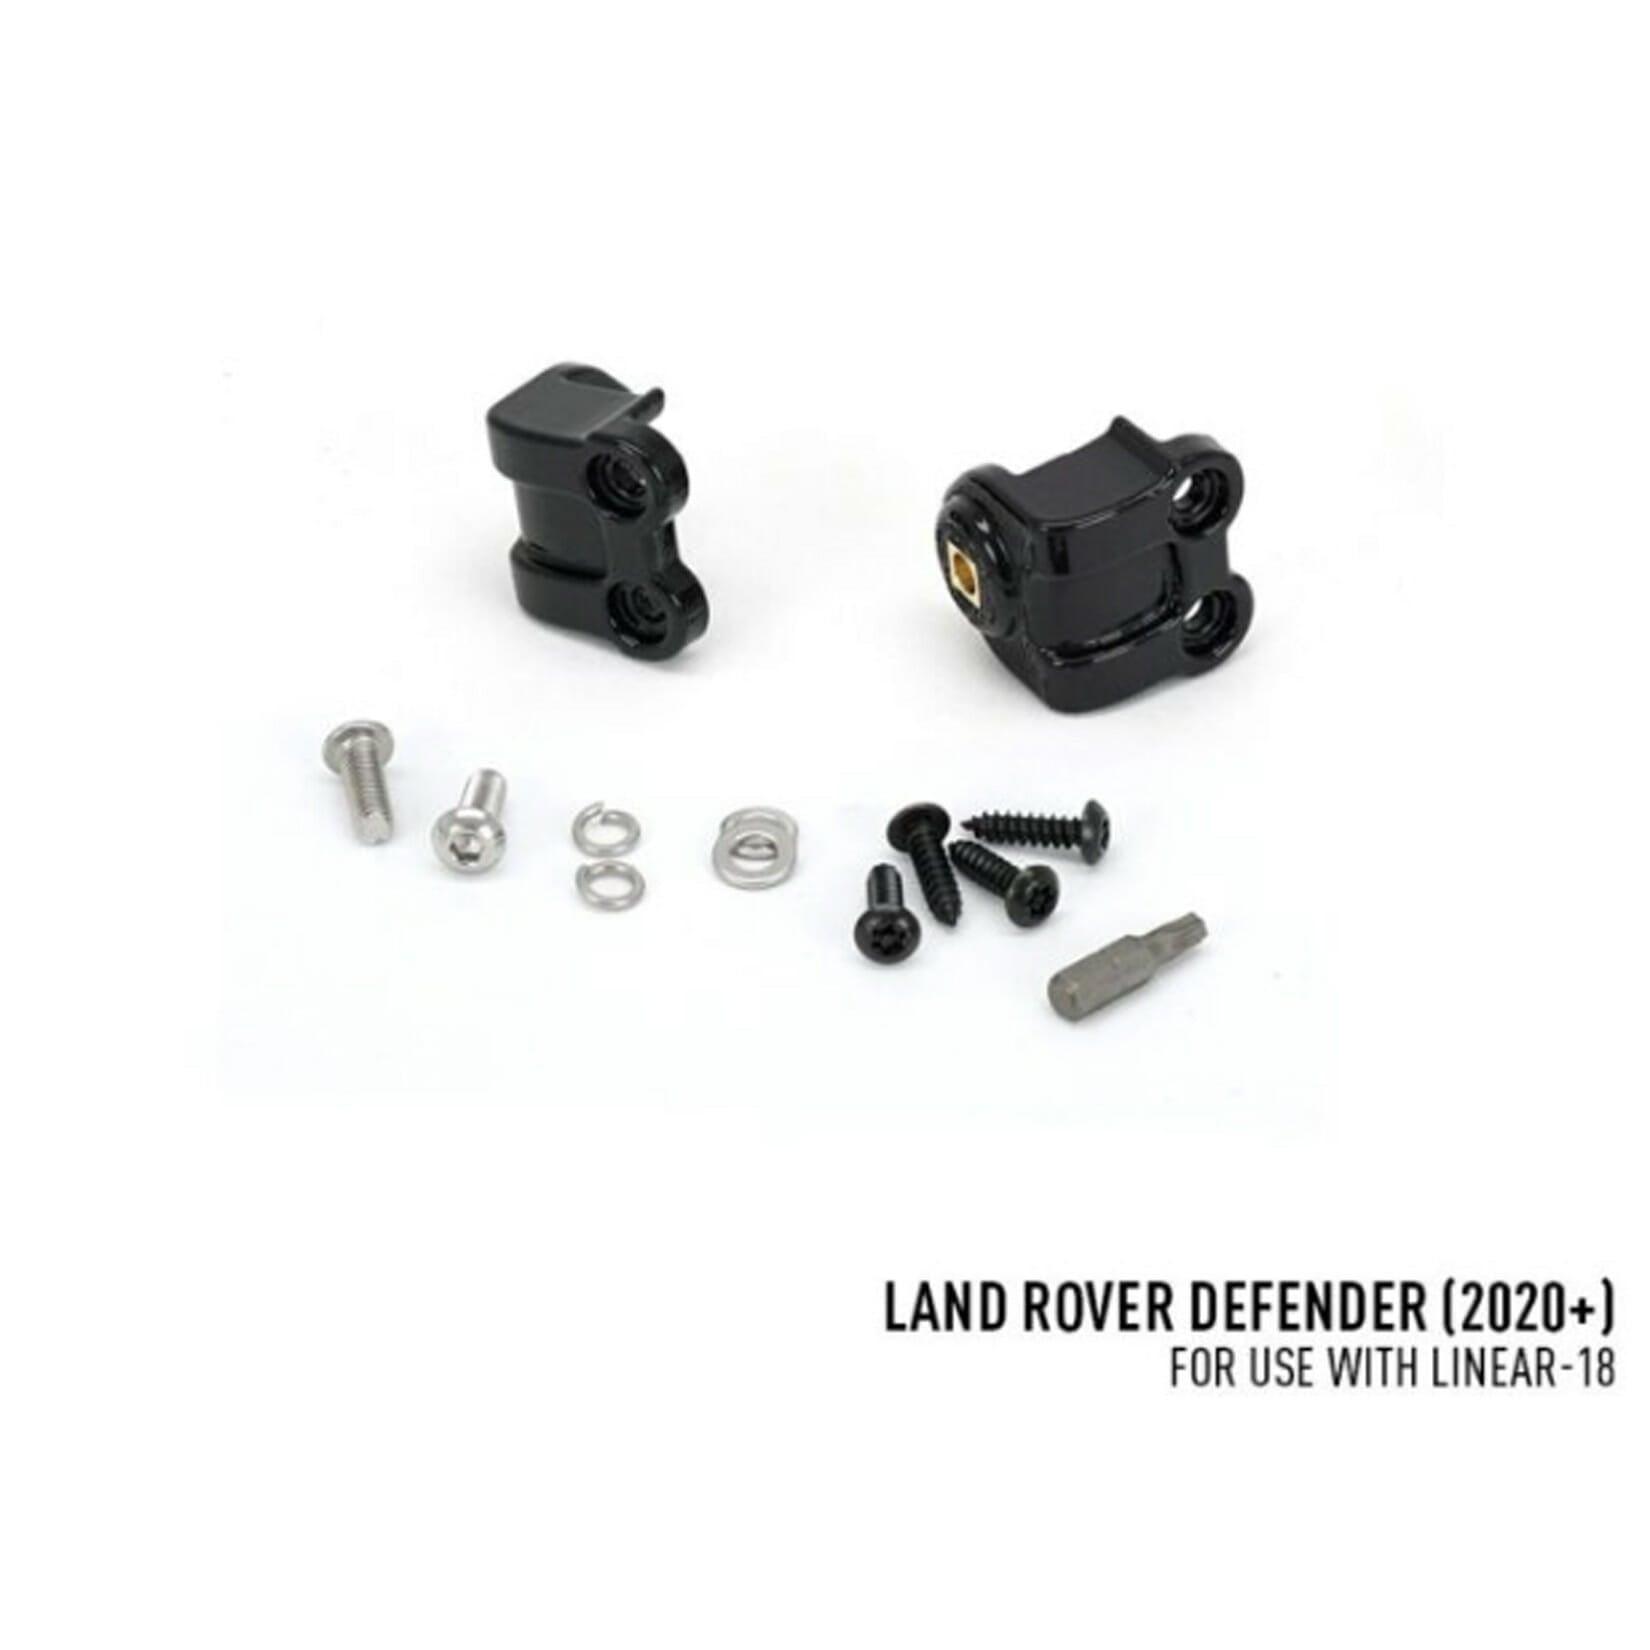 LANDROVER DEFENDER L663 2020 ON - LAZER GRILL LIGHT KIT - L18 ELITE WITH LOW BEAM ASSIST - Storm Xccessories2